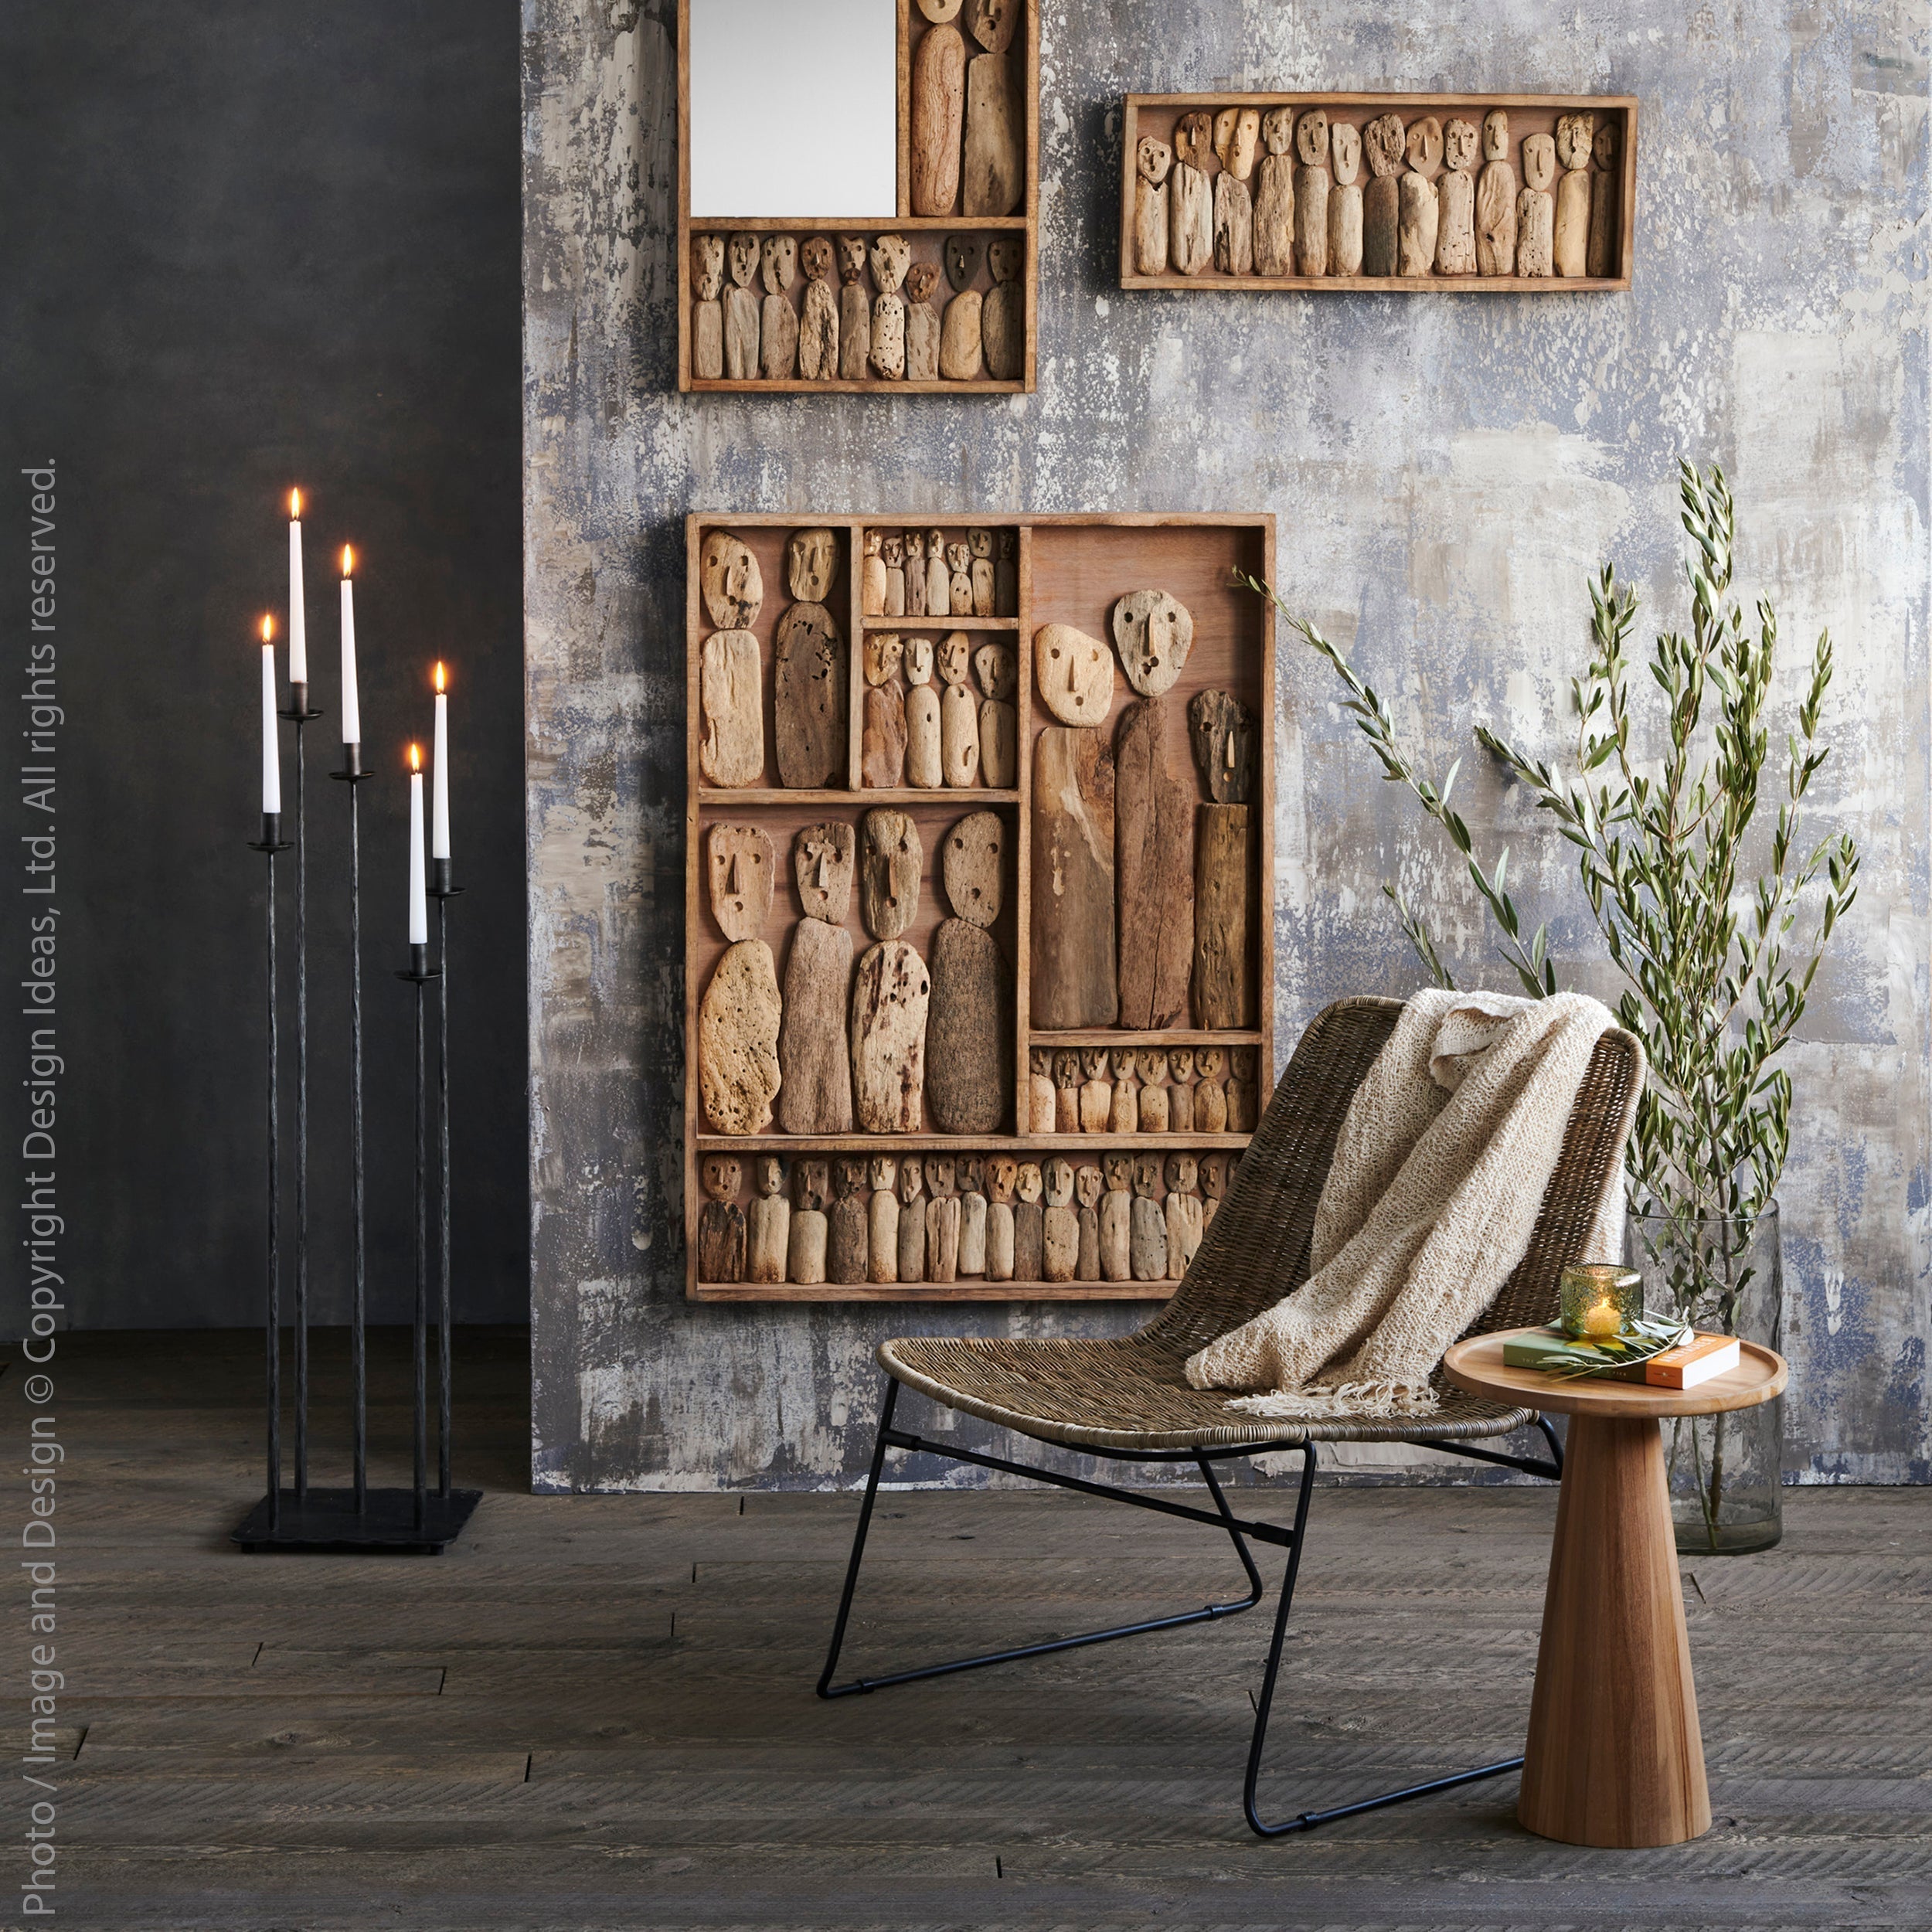 Tavu™ shadow box (26 x 10 x 3in) - Natural | Image 2 | Premium Decorative from the Tavu collection | made with Recycled wood for long lasting use | sustainably sourced with recycled materials | texxture